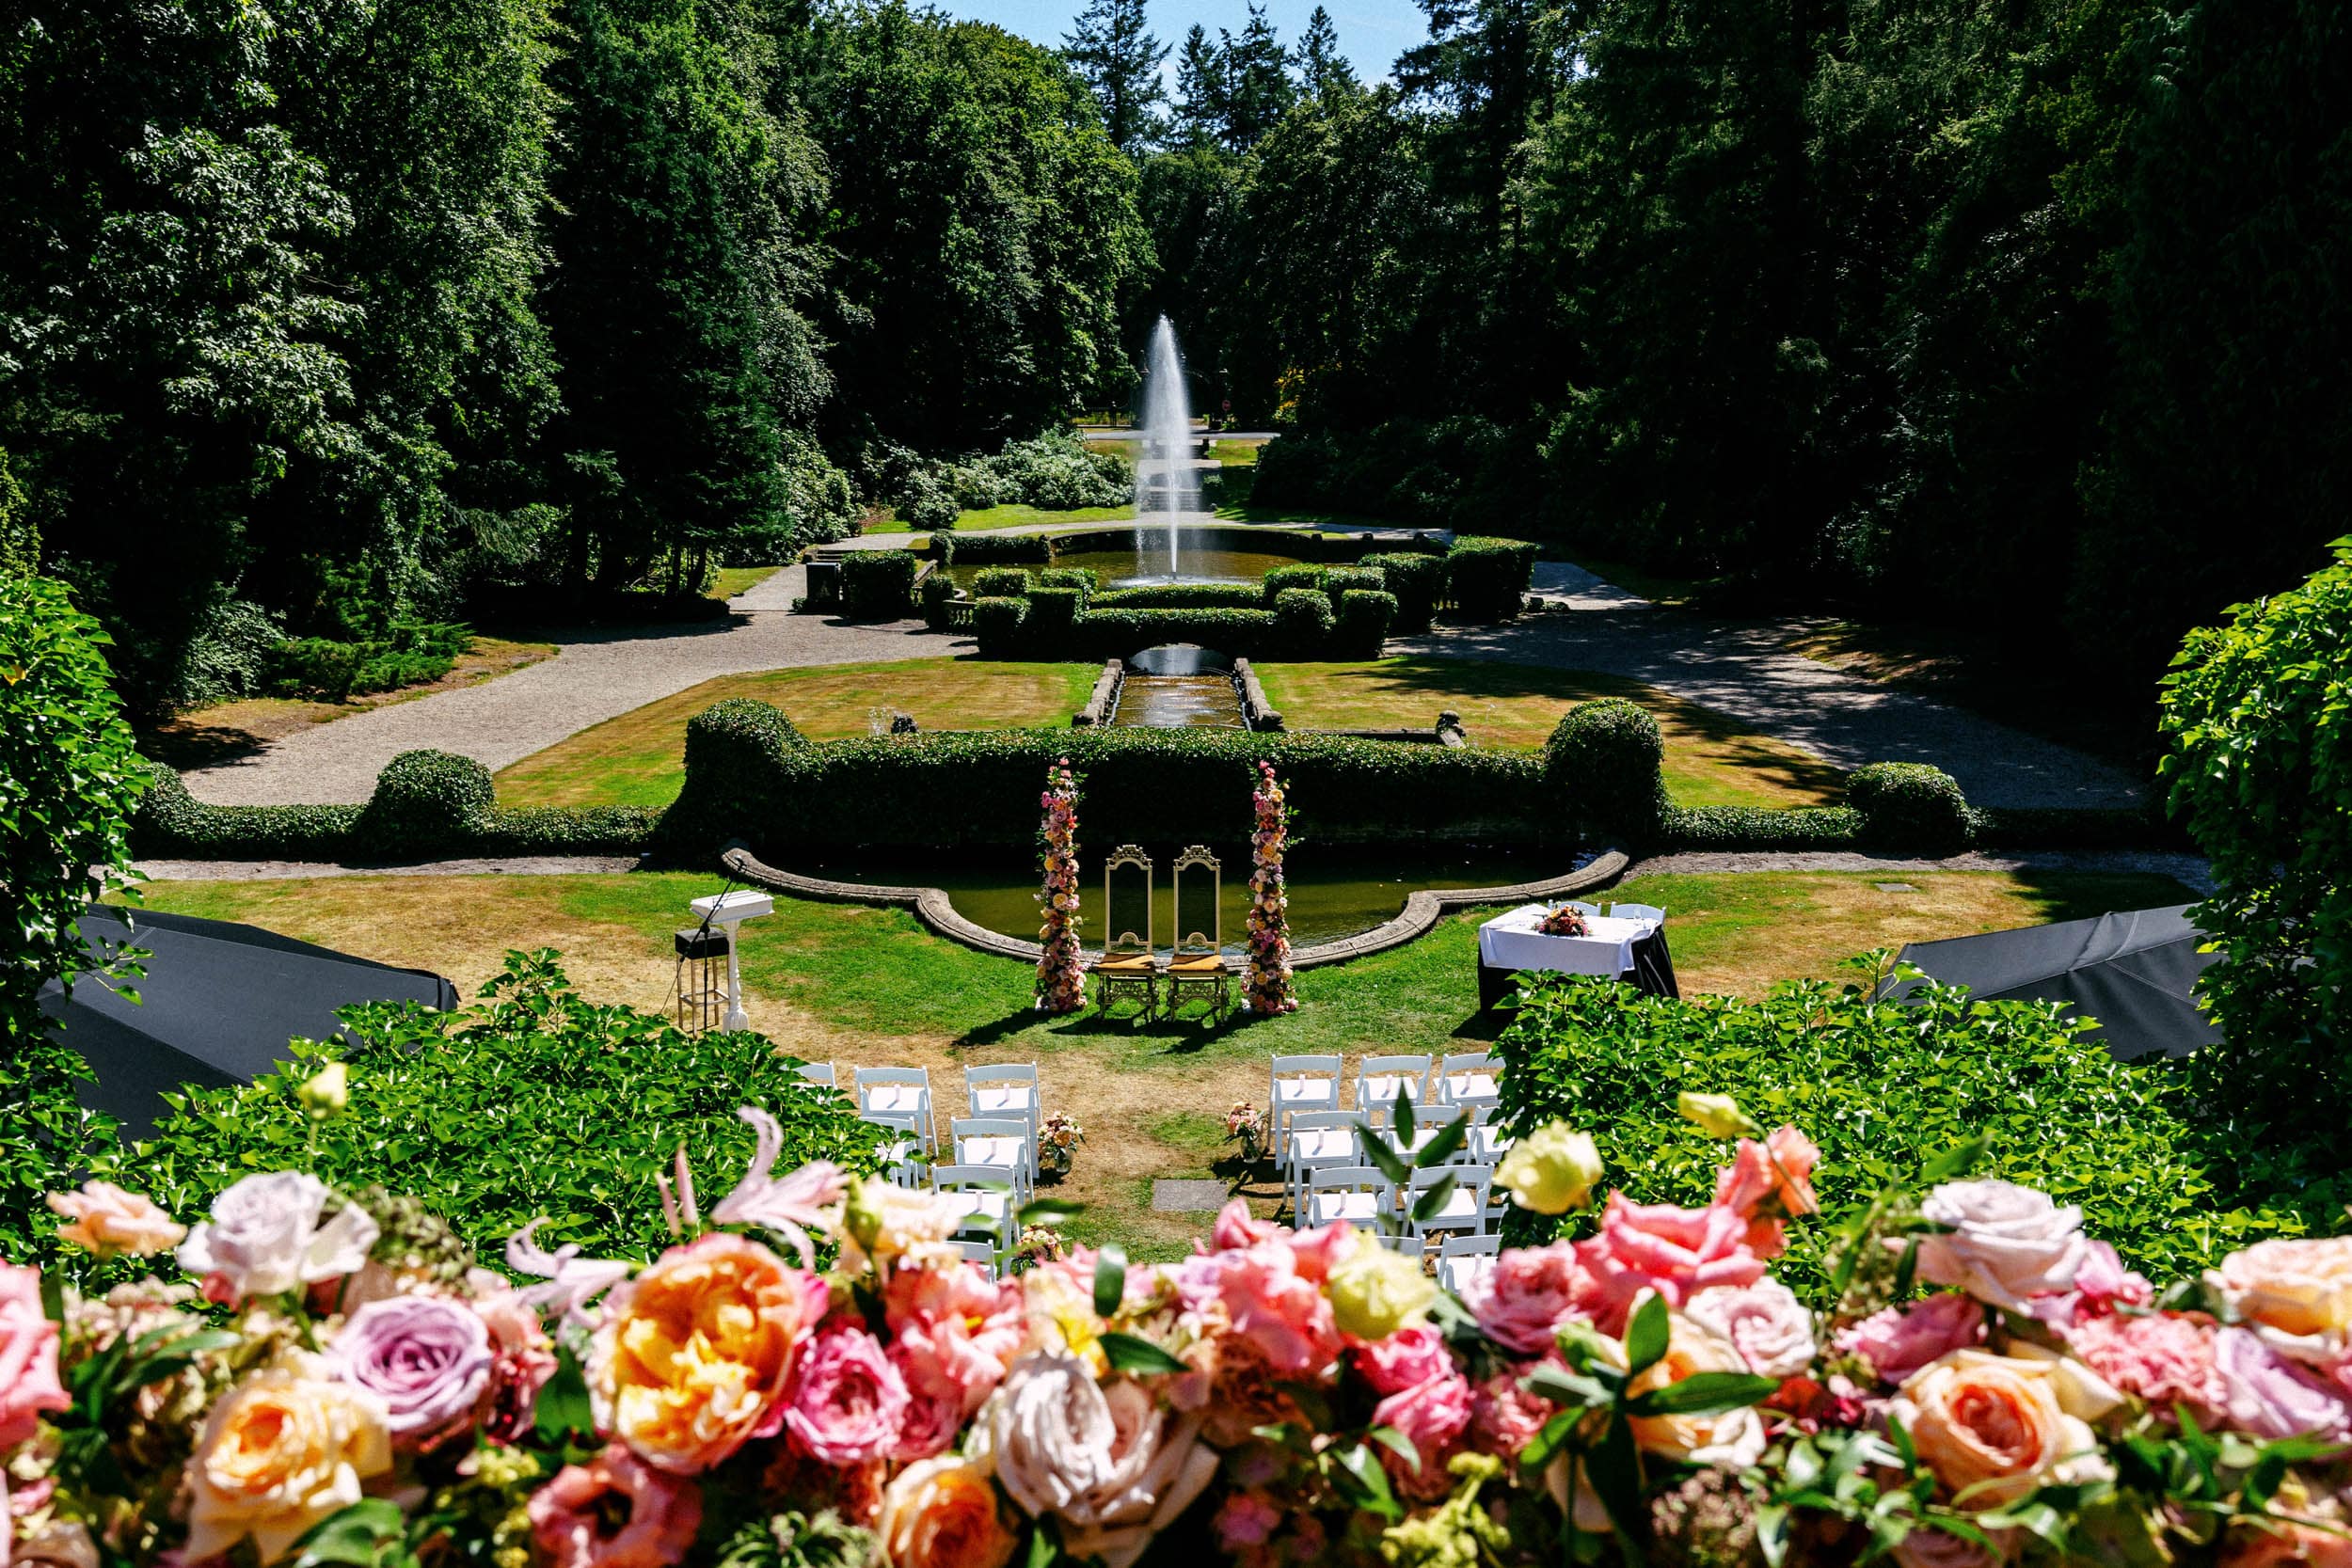 A wedding in a garden with a fountain and flowers.